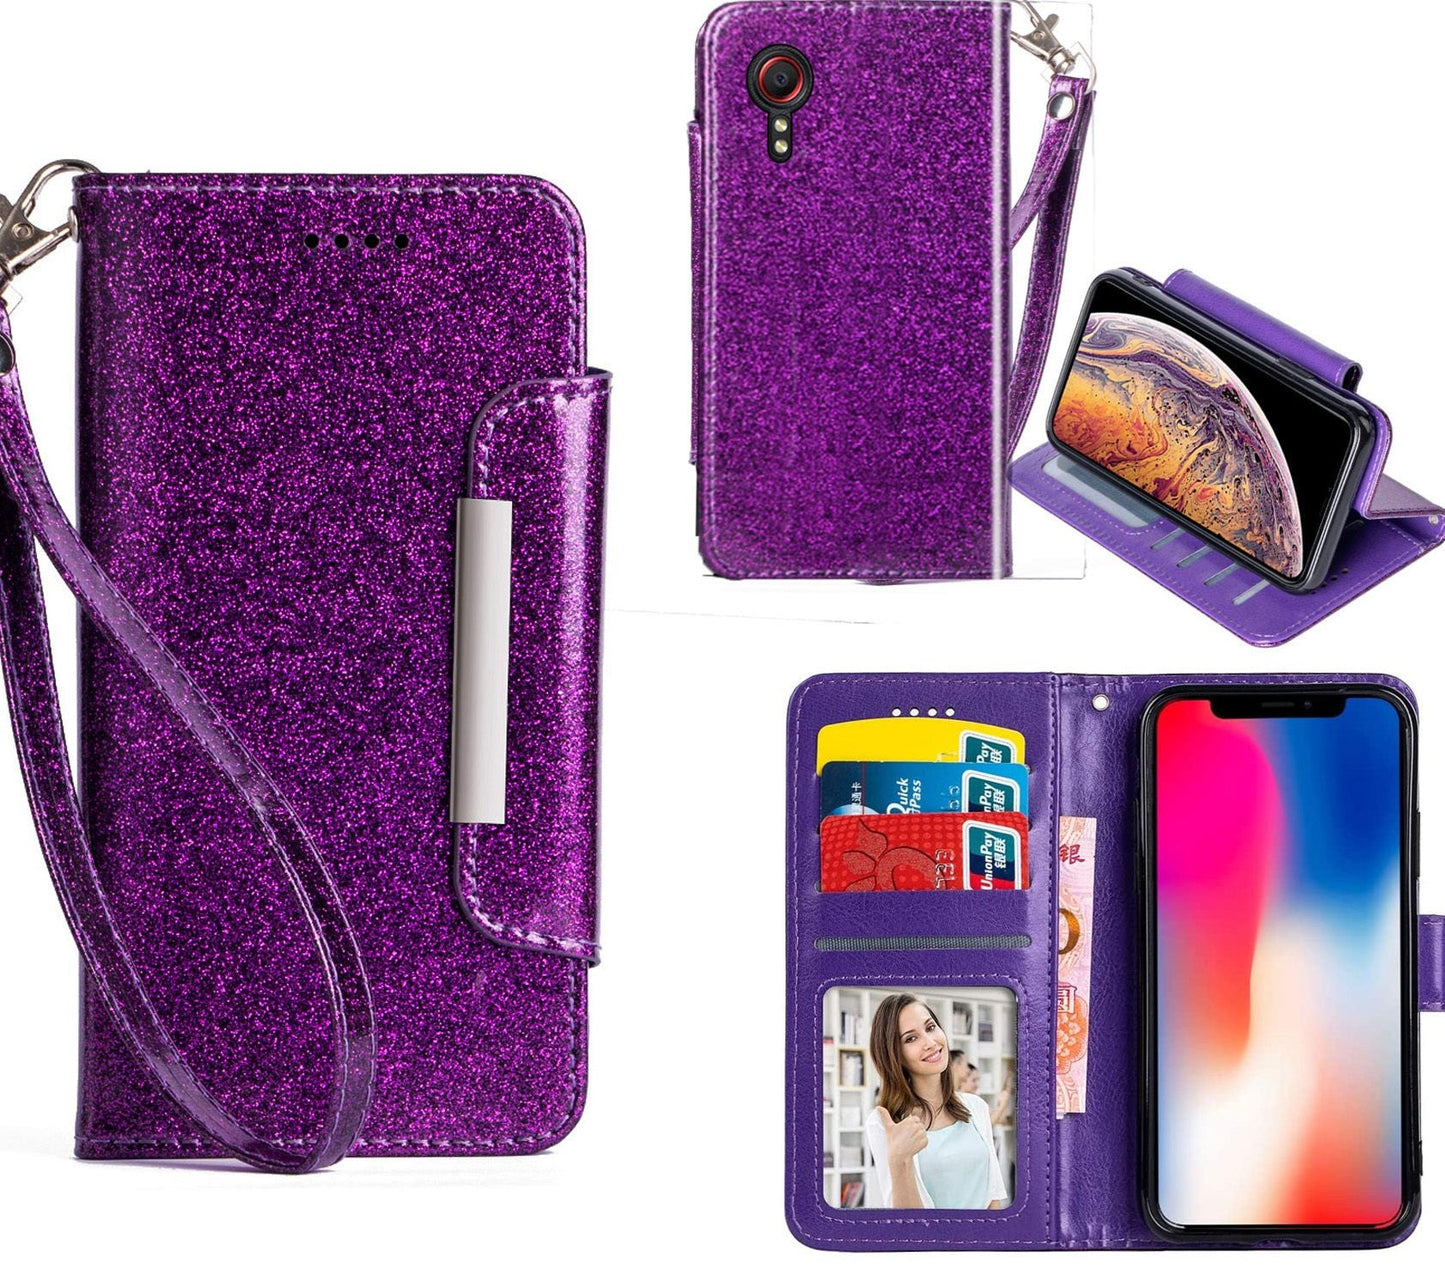 Samsung Galaxy XCover 5 Case Wallet Cover Glitter Purple